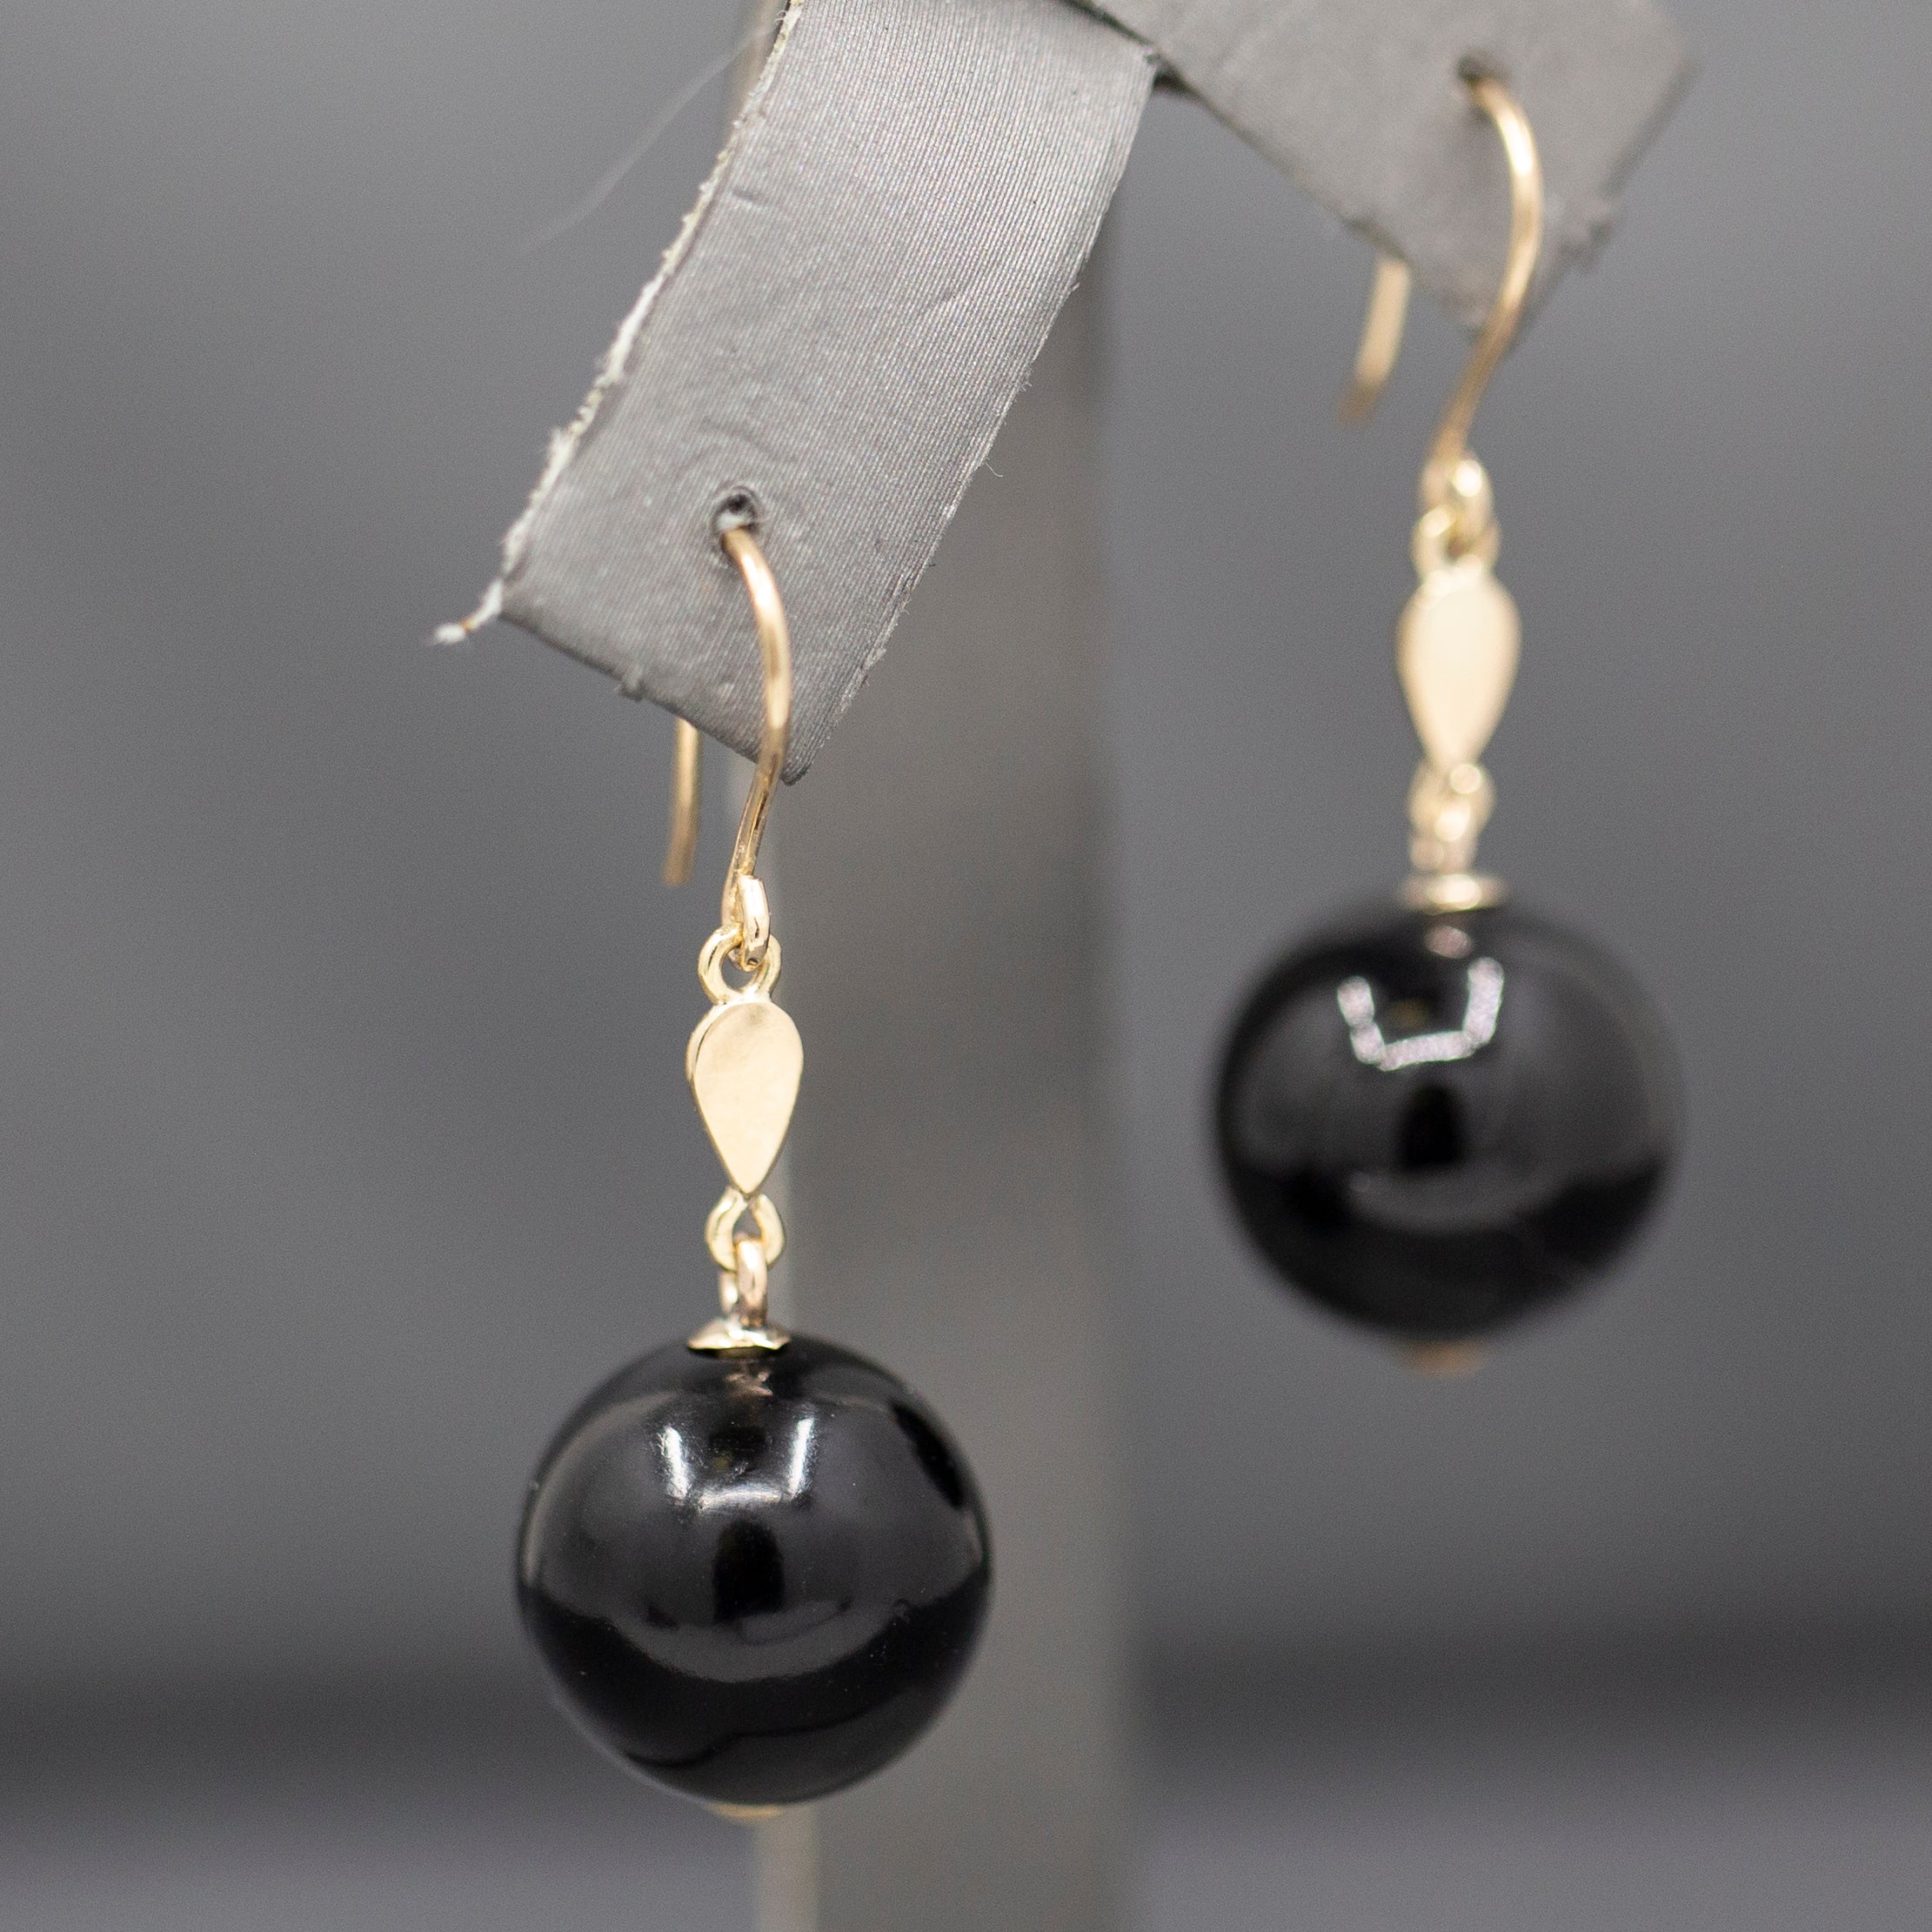 Antique Victorian Mourning Dangle Earrings with Onyx in 14k Yellow Gold